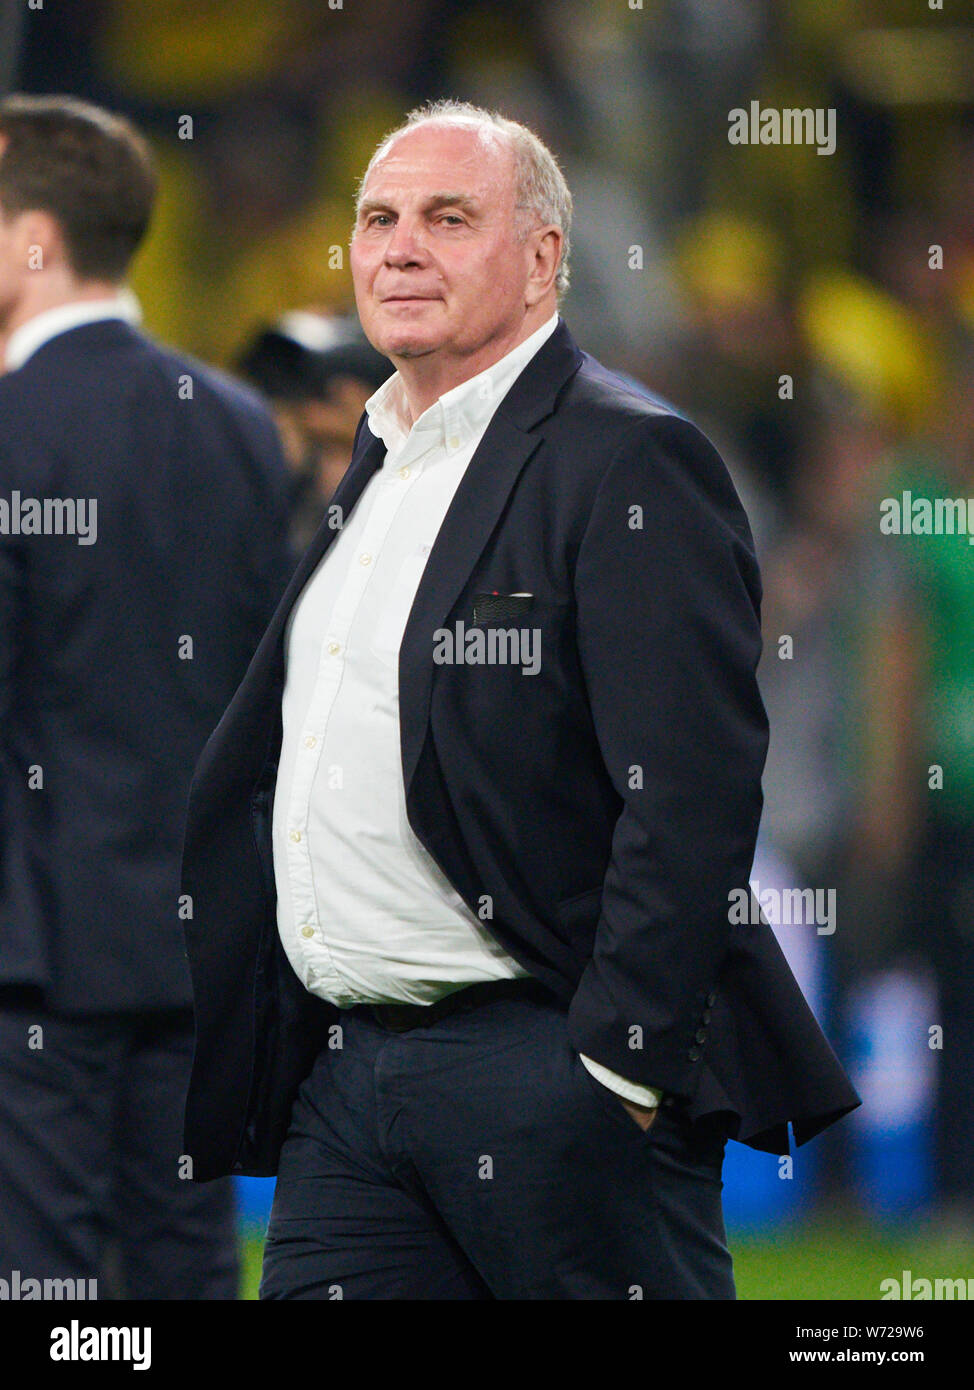 Uli HOENESS (FCB President ), FCB President and chairman, after the match,  half-size, portrait,  BORUSSIA DORTMUND - FC BAYERN MUNICH 2-0 DFL REGULATIONS PROHIBIT ANY USE OF PHOTOGRAPHS AS IMAGE SEQUENCES AND/OR QUASI-VIDEO. DFL SUPERCUP, Final 1. German Football League, matchday  in Dortmund, August 03, 2019,  Season 2019/2020 © Peter Schatz / Alamy Live News Stock Photo